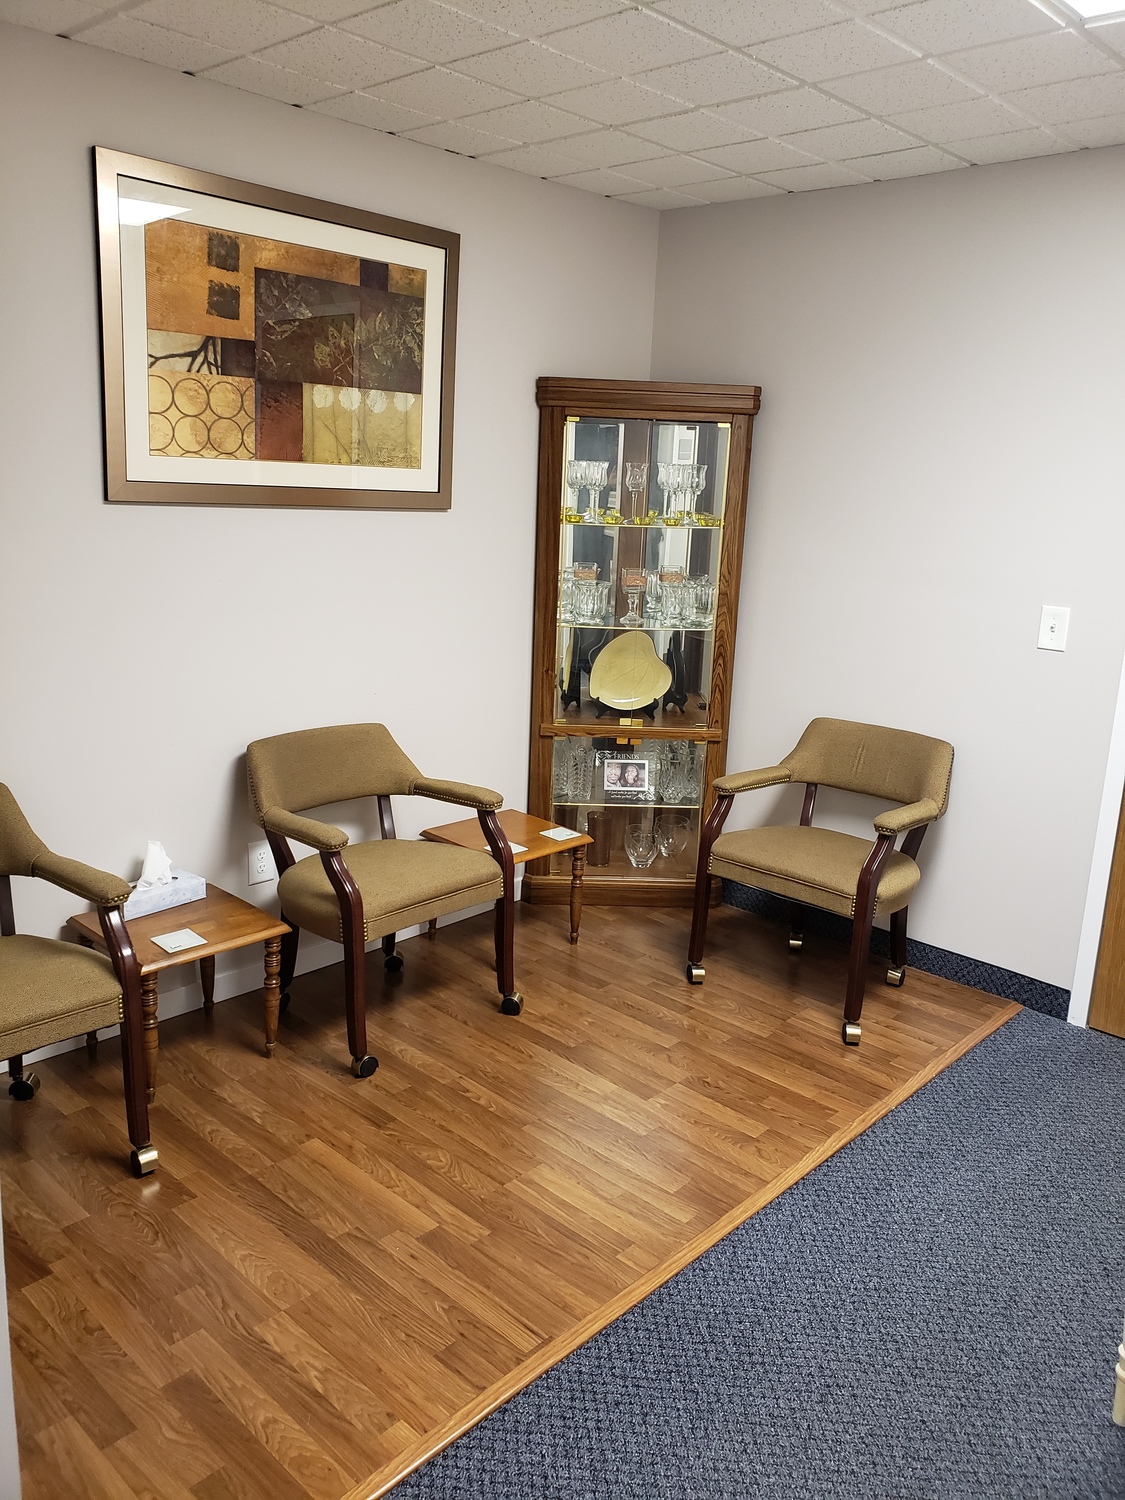 Gallery Photo of Grand Rapids Office Waiting Area